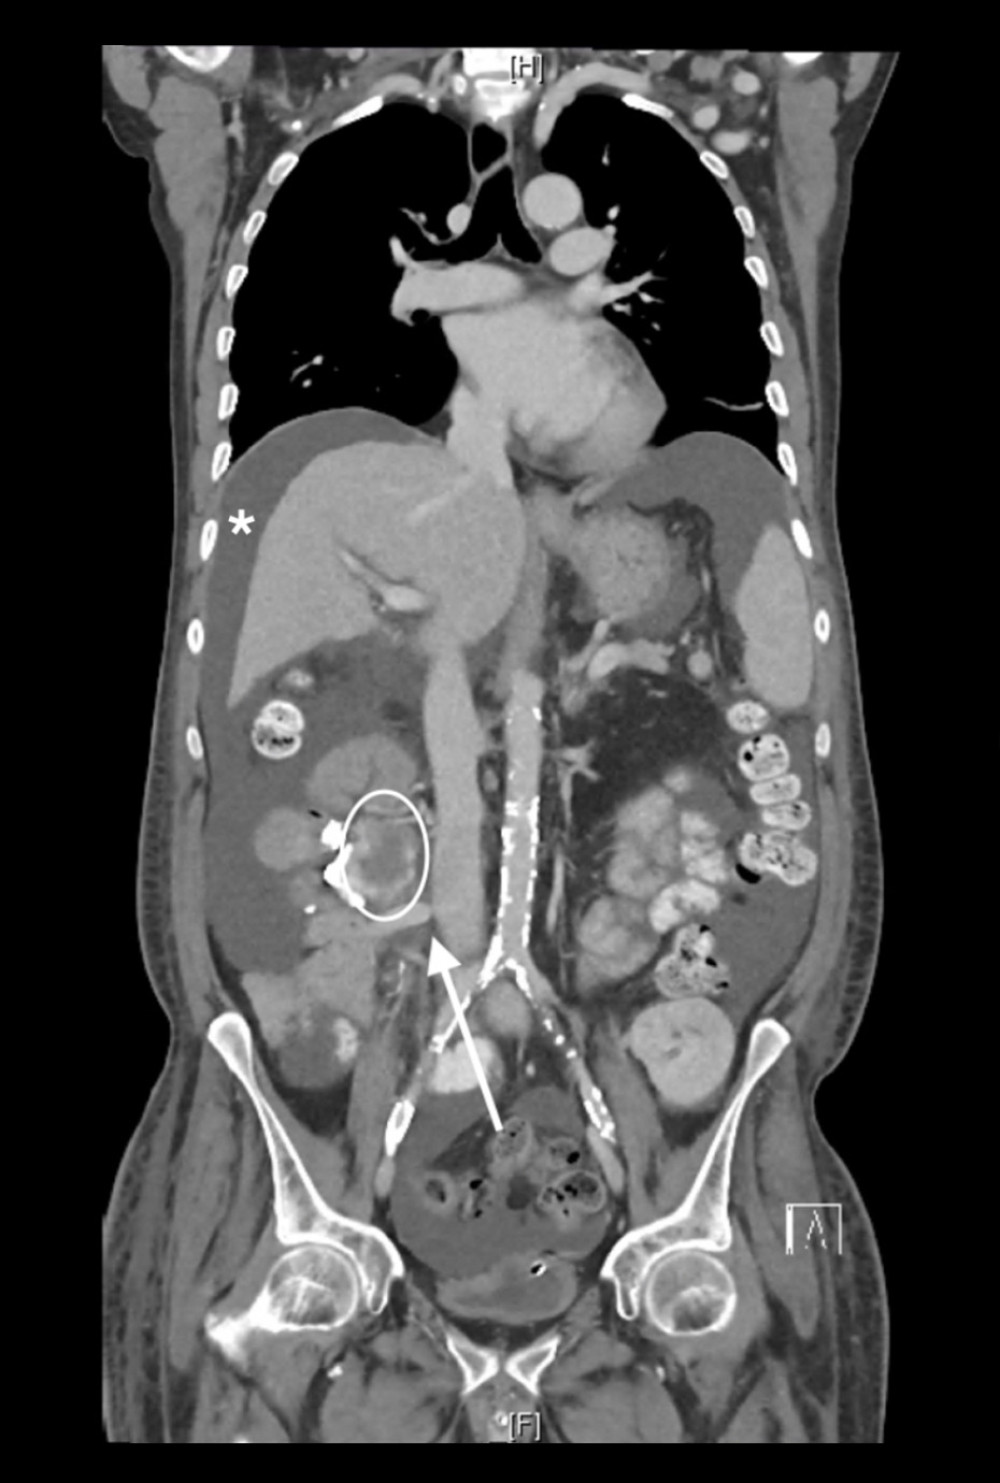 Stenosis of the portosystemic anastomosis of vena cava inferior (arrow). Pronounced jejunal varices in the donor’s duodenum (ellipse) after pancreas-kidney transplantation. Asterisk shows ascites.